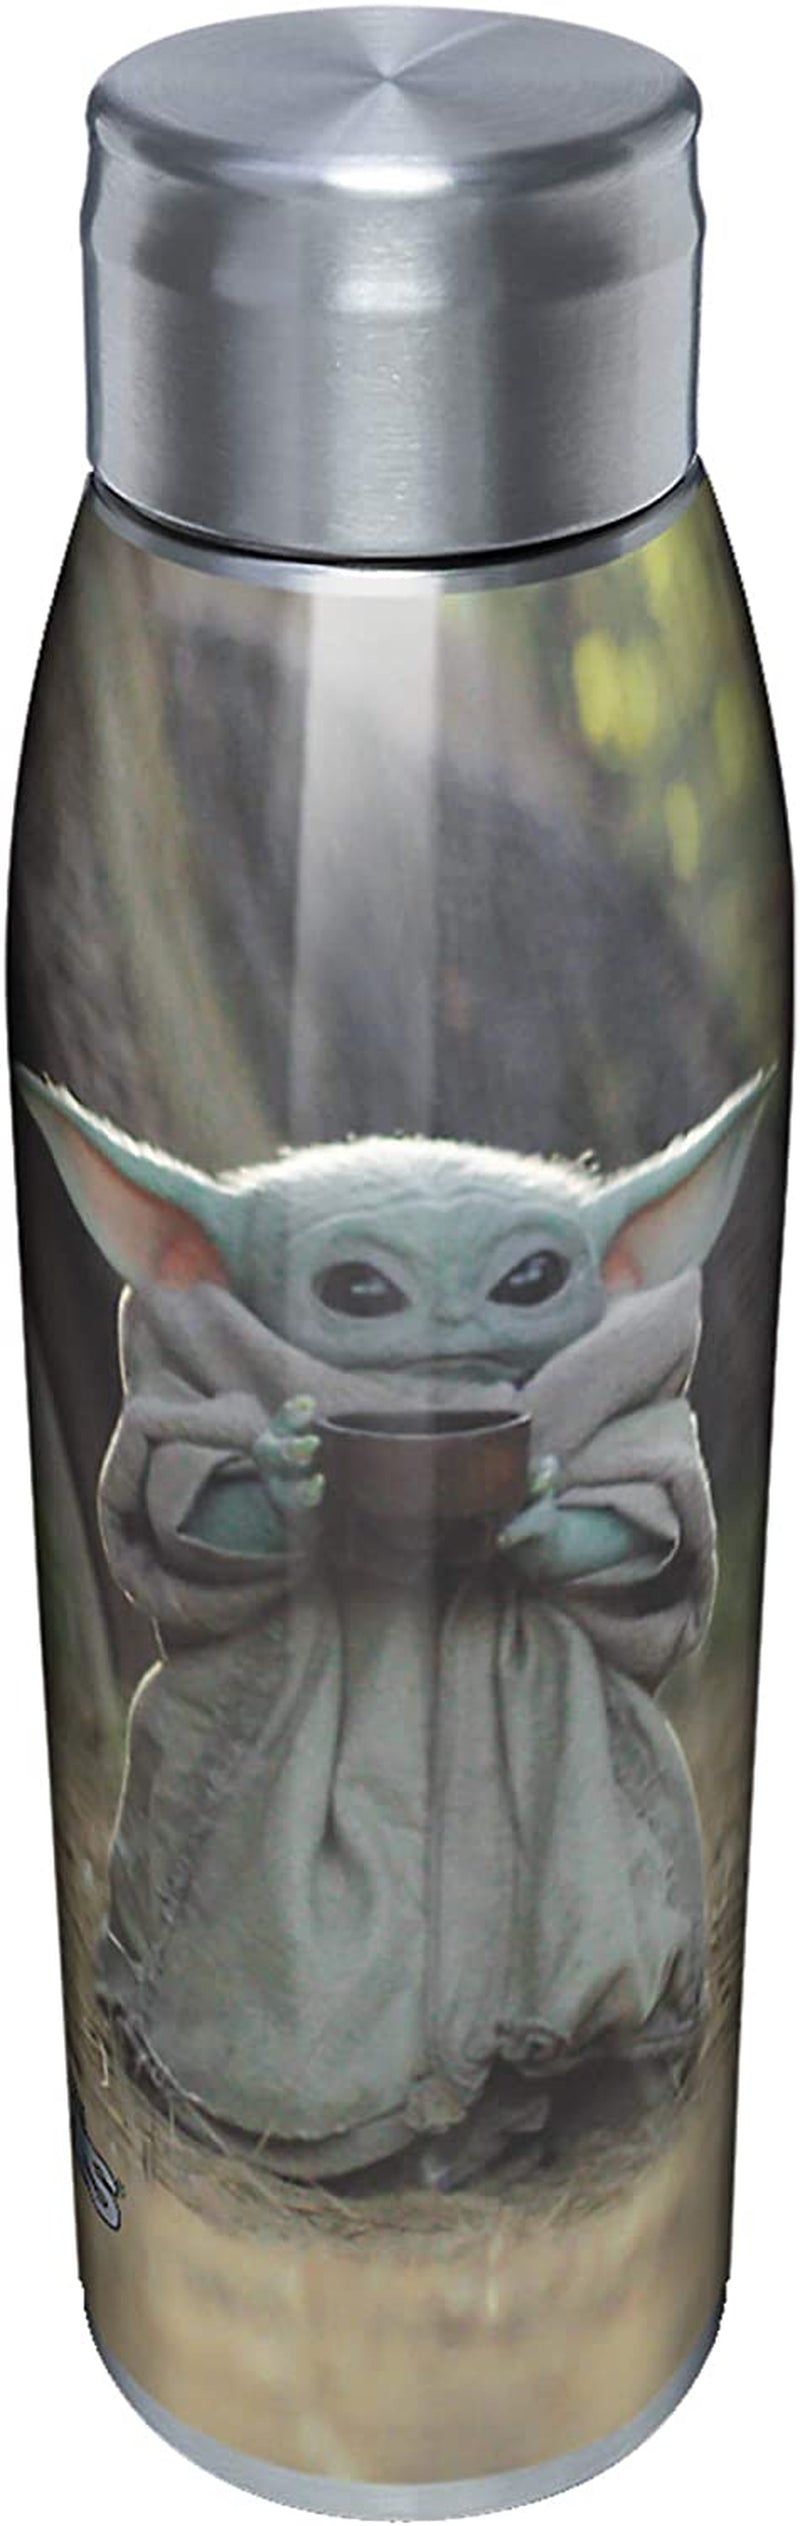 Tervis Made in USA Double Walled Star Wars - the Mandalorian Child Sipping Insulated Tumbler Cup Keeps Drinks Cold & Hot, 16Oz, Clear